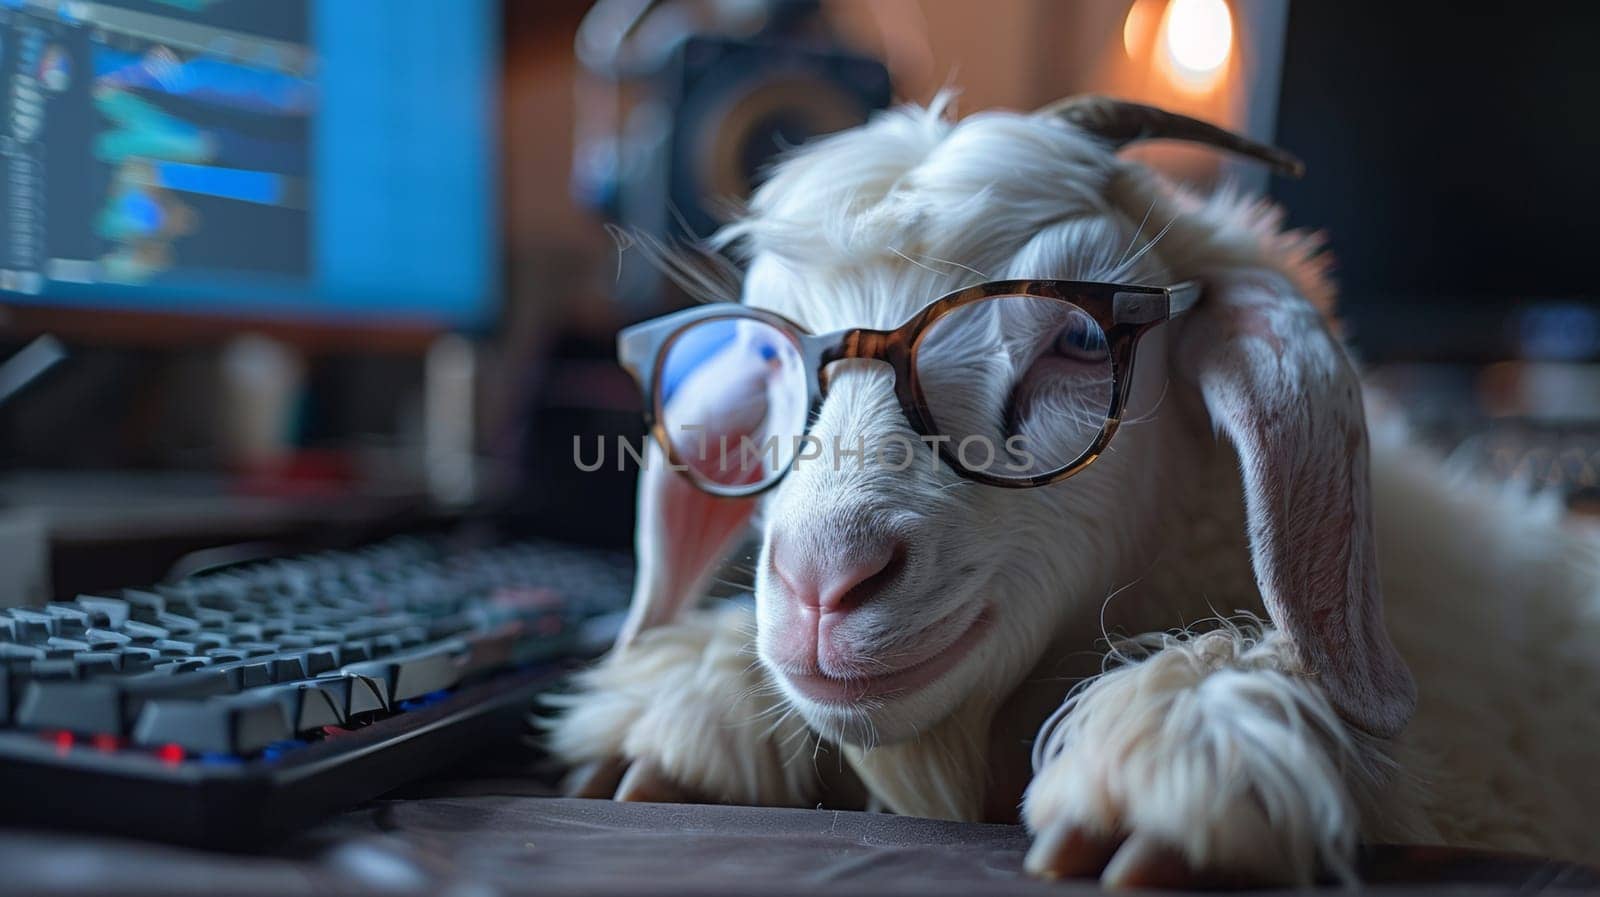 A goat wearing glasses and sitting next to a keyboard